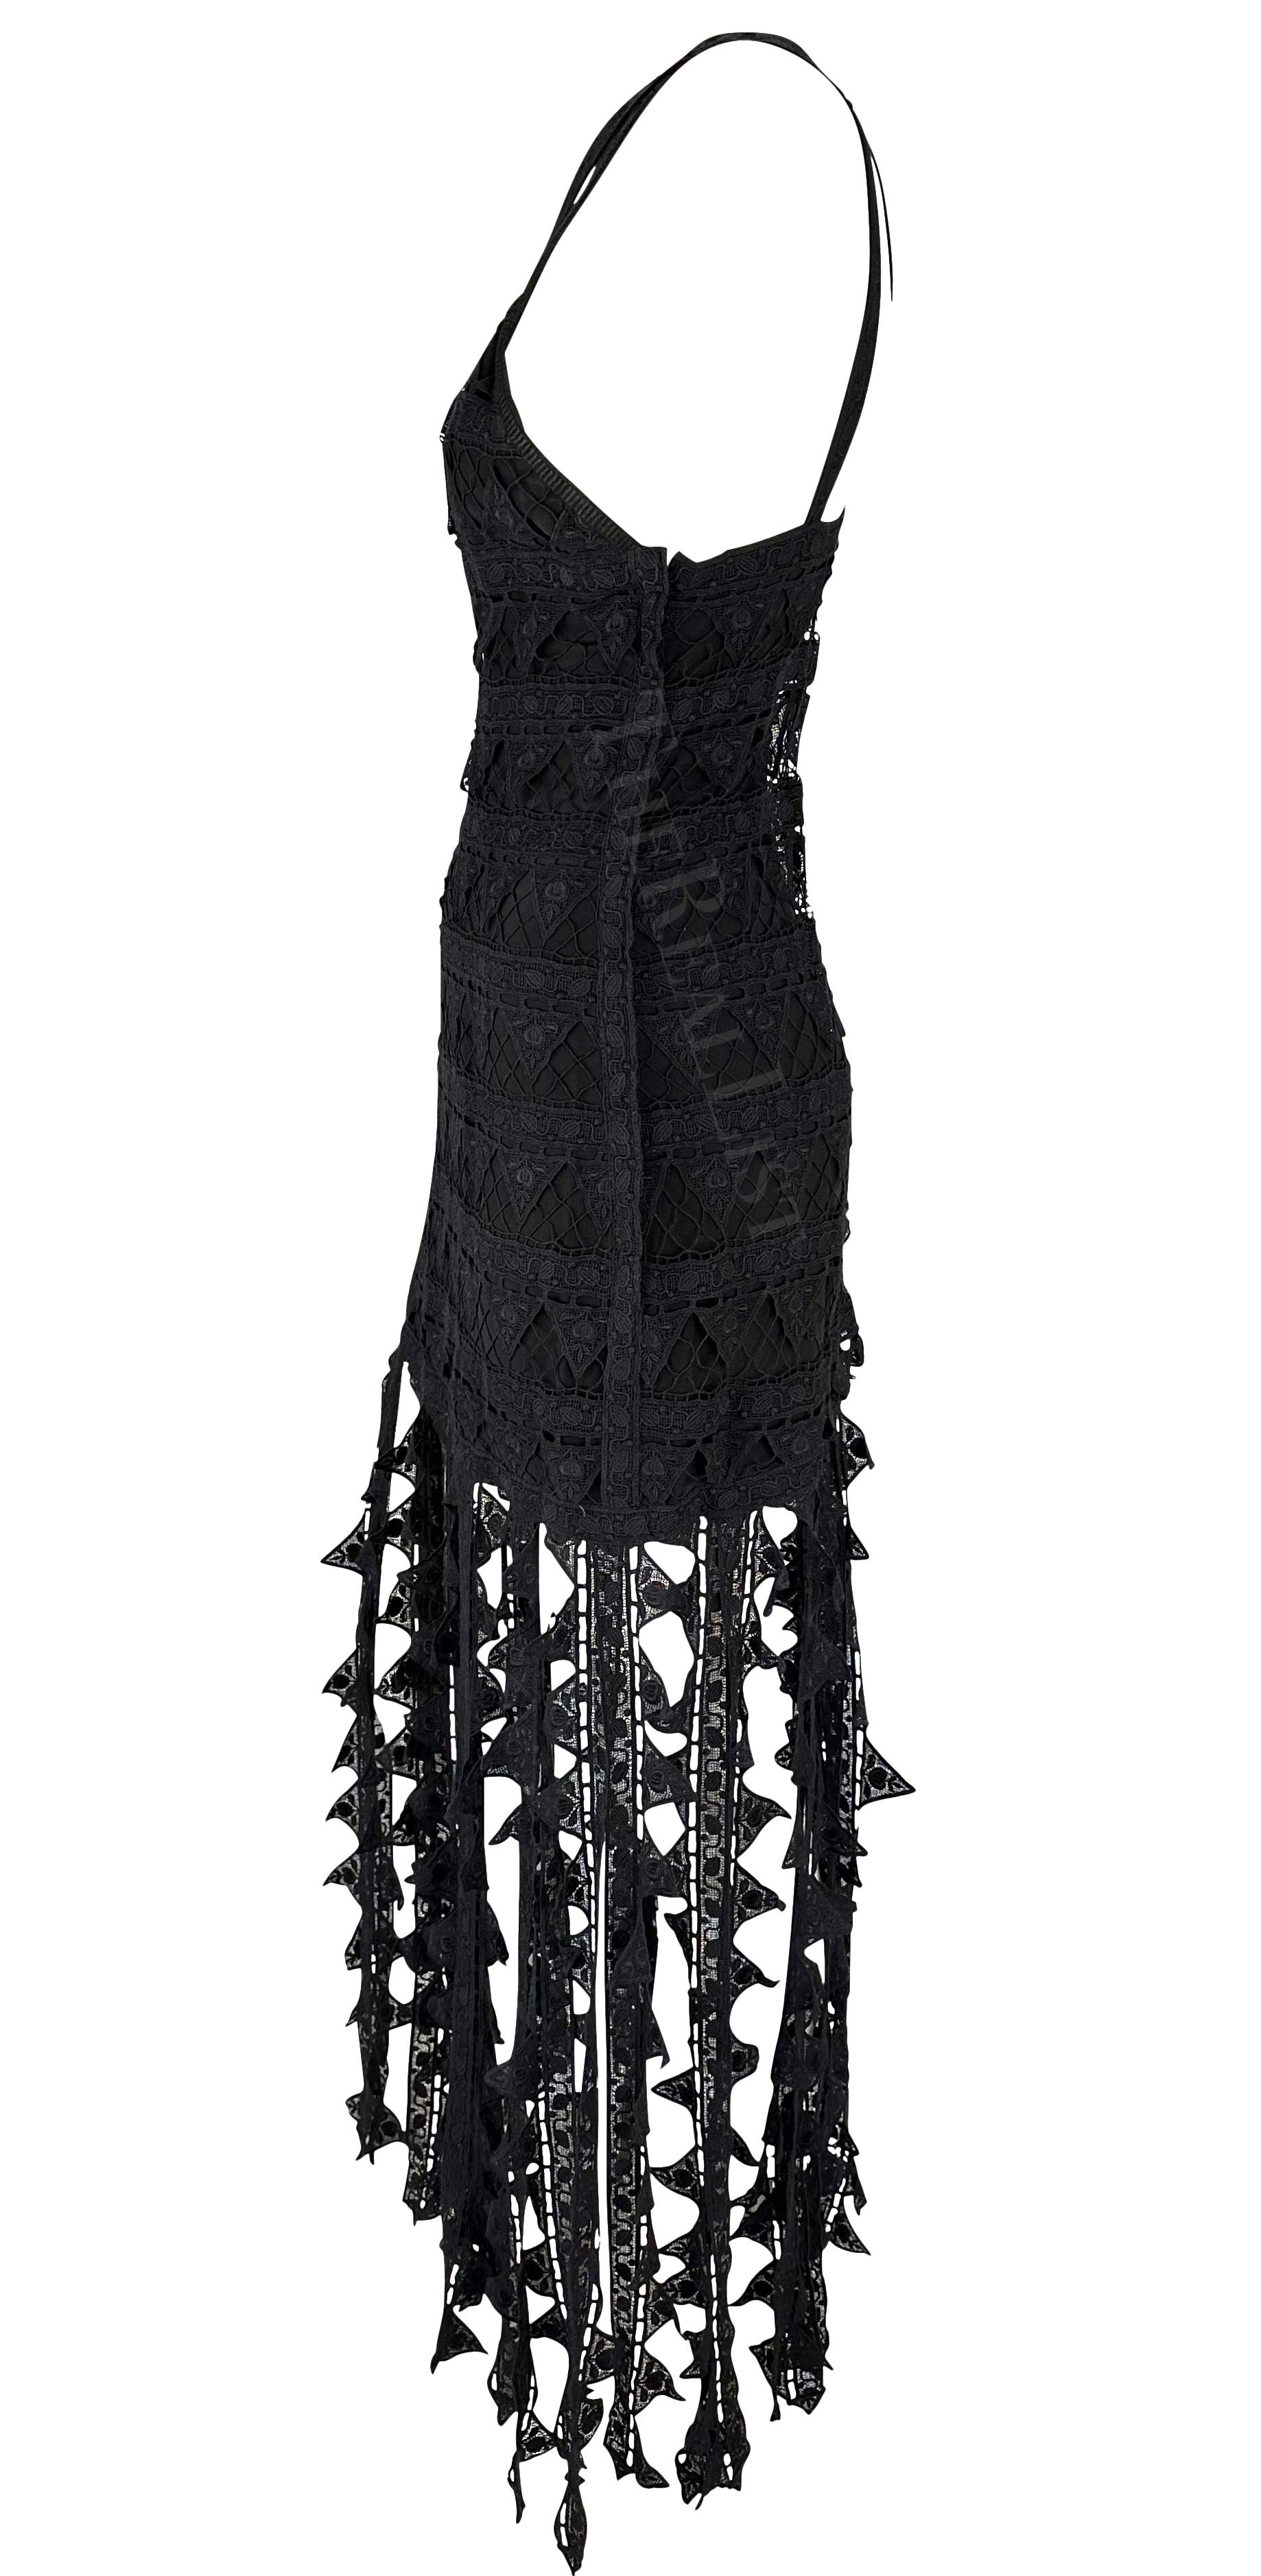 S/S 1993 Chloé by Karl Lagerfeld Runway Black Floral Triangle Lace Dress For Sale 3